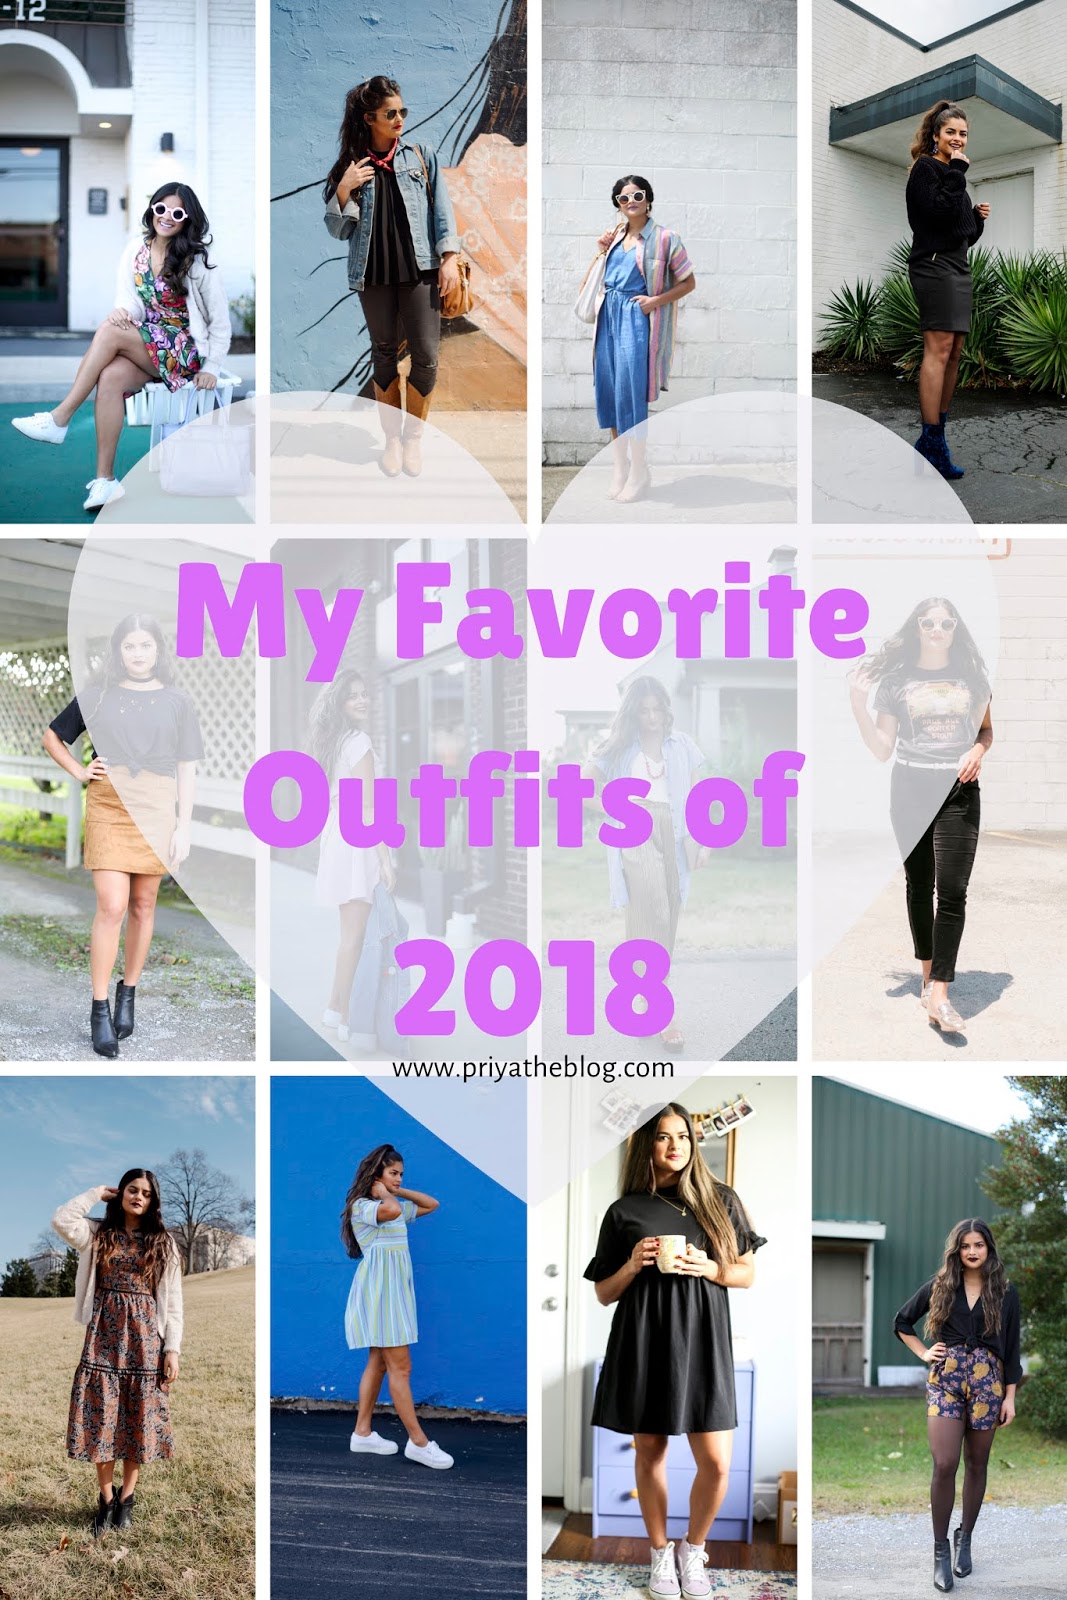 Priya the Blog, Nashville fashion blog, Nashville fashion blogger, Nashville style blogger, Nashville style blog, My Favorite Outfits of 2018, fashion, best outfits of 2018